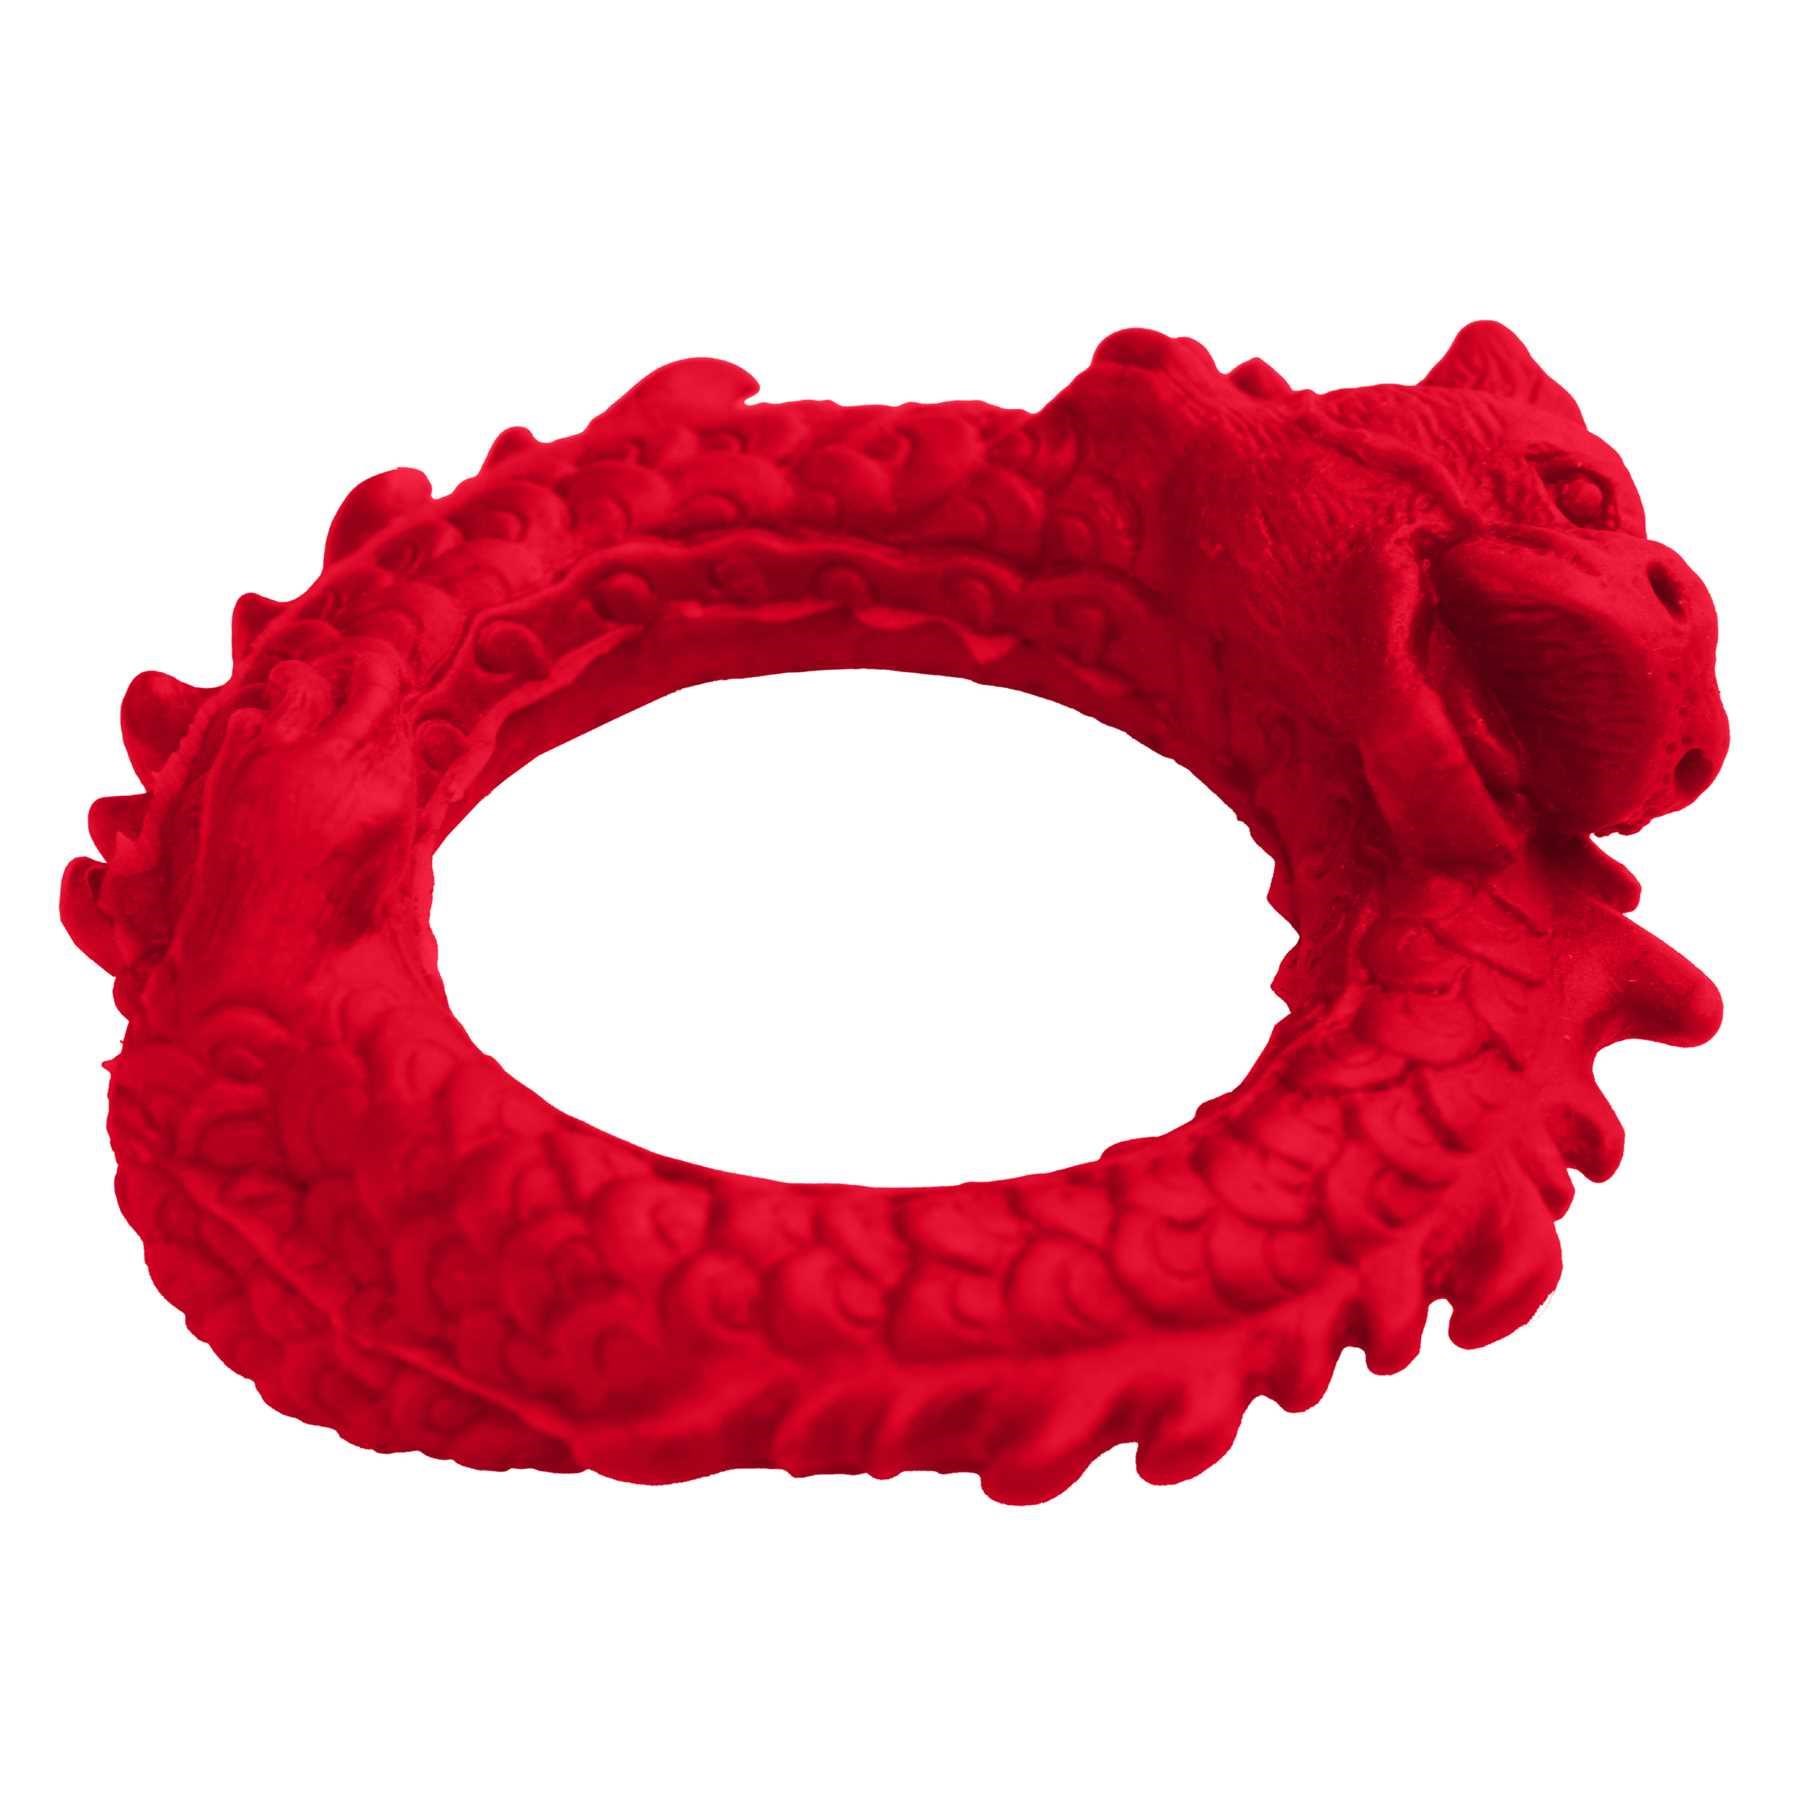 Creature Cocks Rise of the Dragon Silicone Cock Ring flat on table